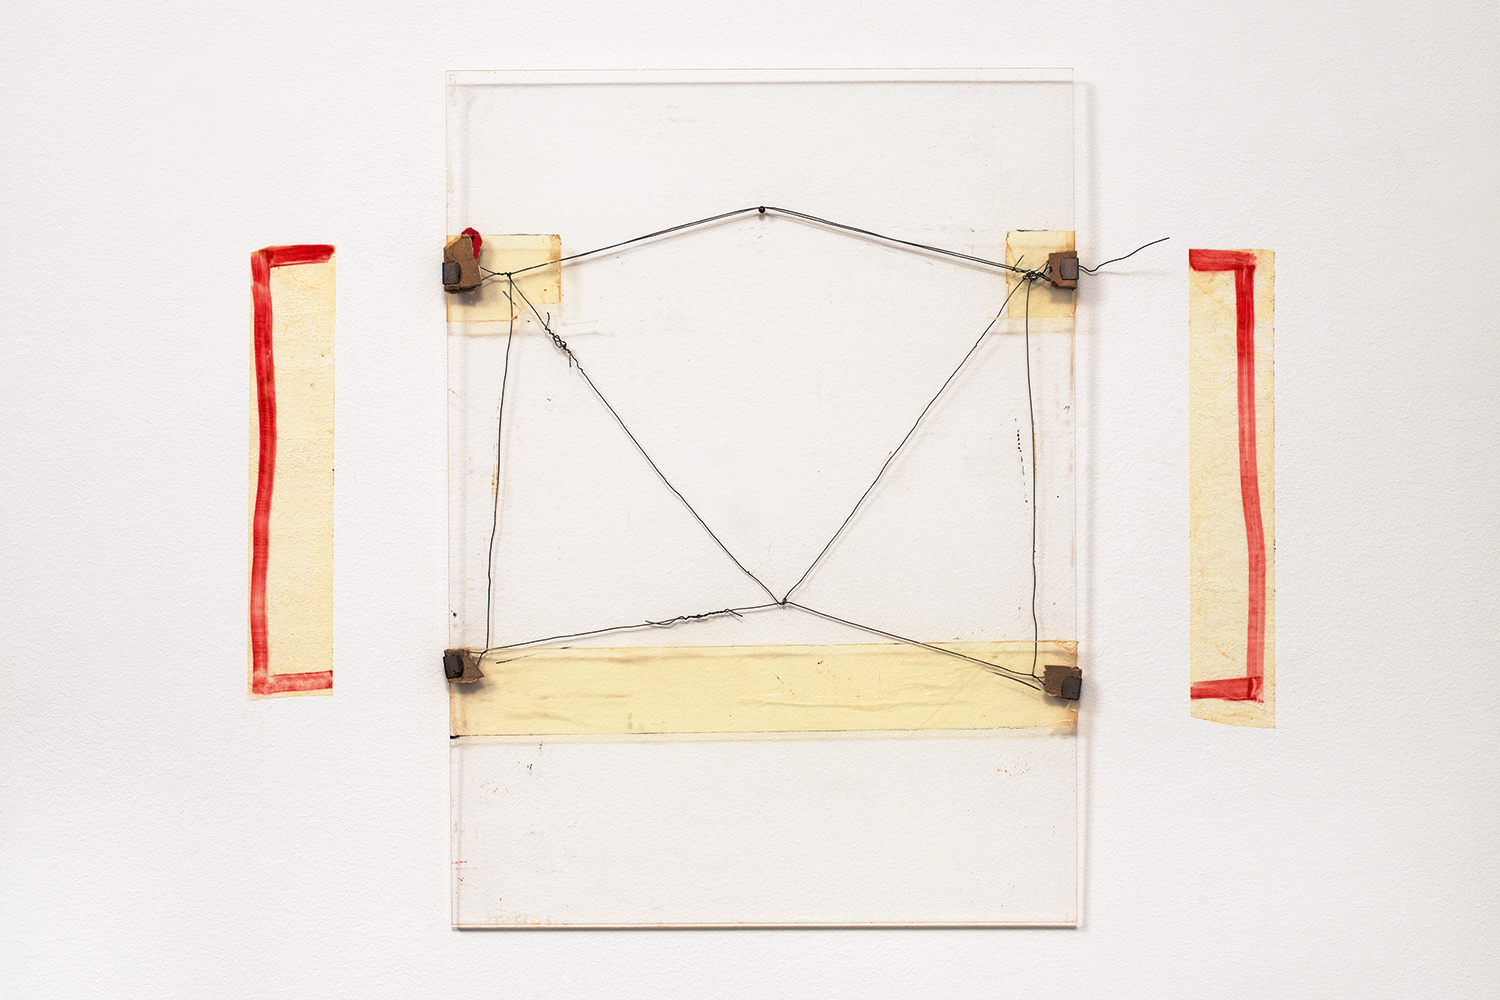  Nahum Tevet, Untitled #15, 1974. Cardboard, metal clips, wire, and transparent tape on Plexiglas, marker on transparent tape, Plexiglas: 19 3/4 x 14 3/4 x 7/16 in. (50.2 x 37.5 x 1.1 cm), Installed: 19 3/4 x 23 5/8 x 7/16 in (50.2 x 60 x 1.1 cm). Co